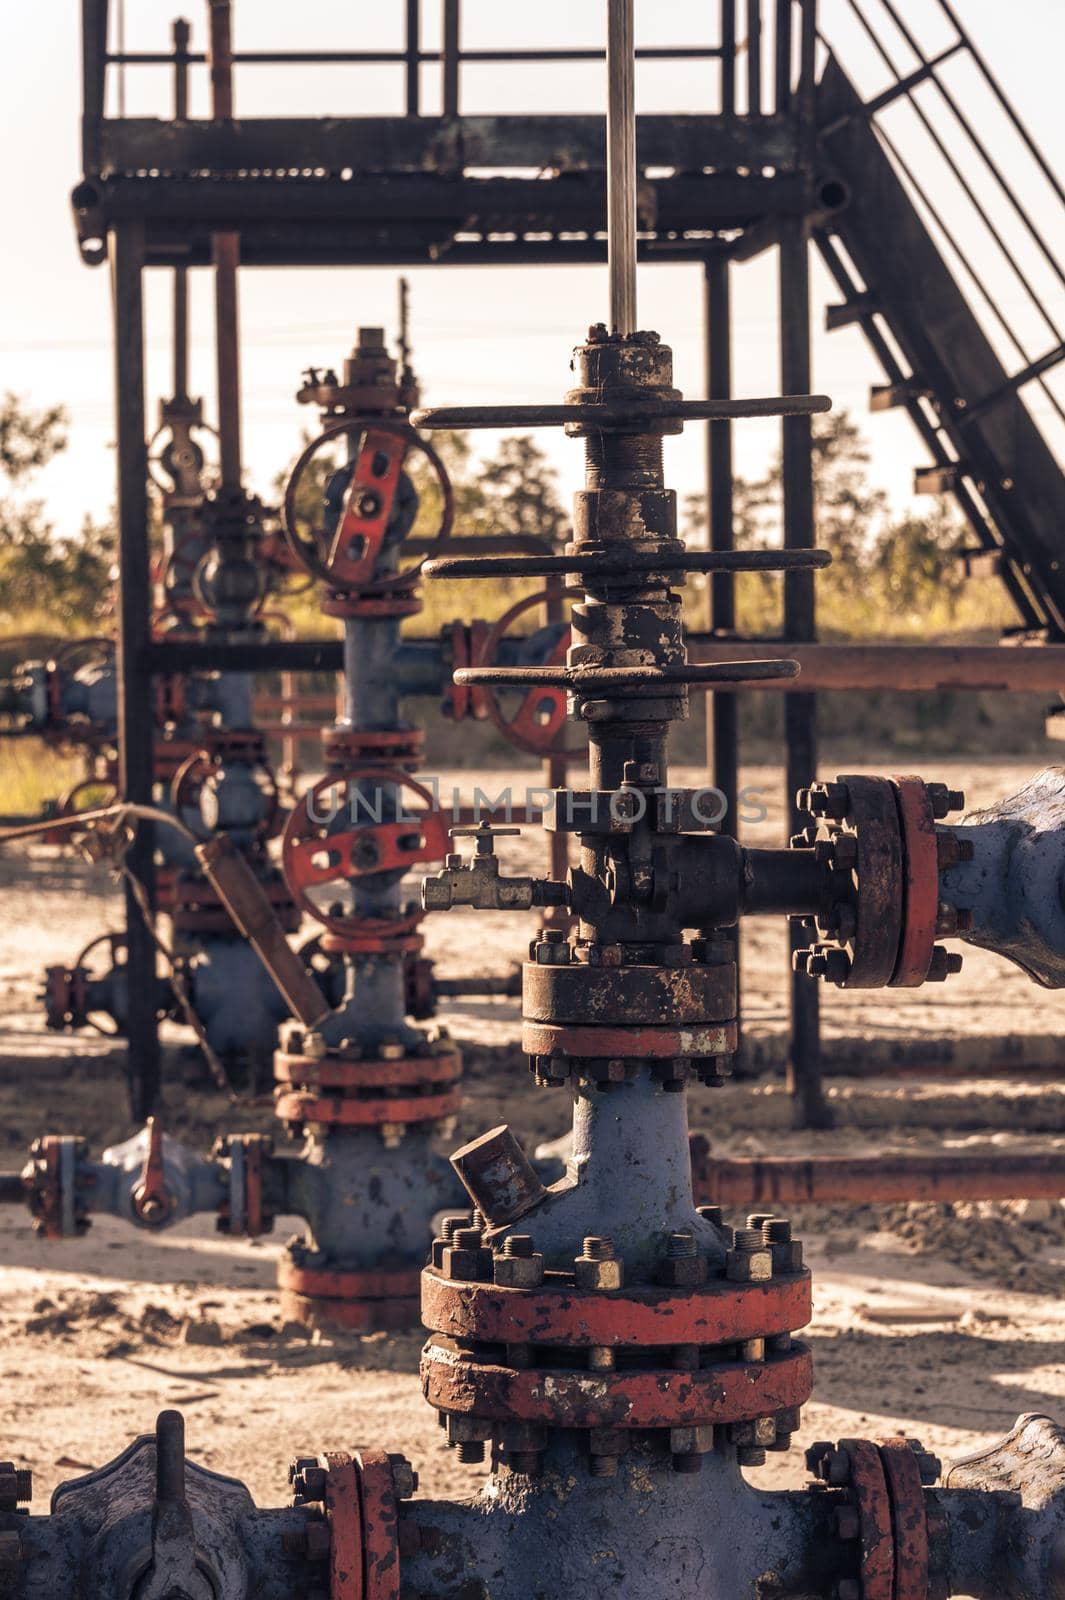 Oil wellhead with valve armature. Oil and gas industry theme. Petroleum concept. by bashta